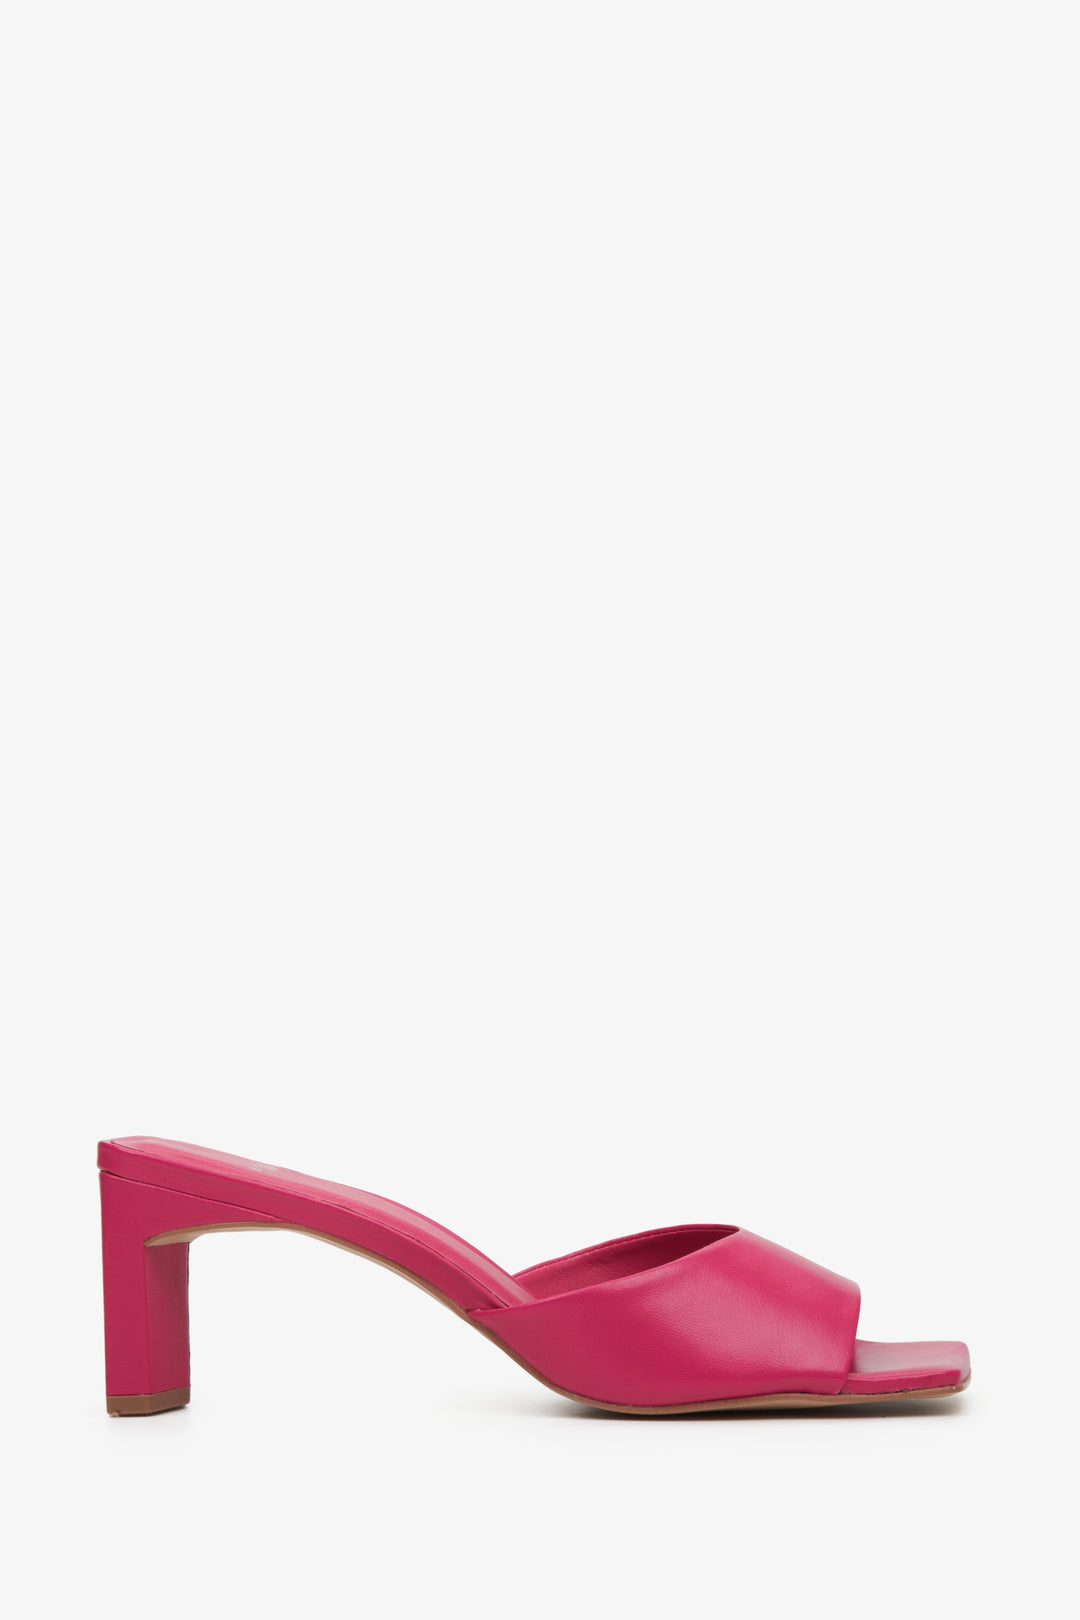 Women's pink leather mules with a sturdy block heel by Estro - shoe profile.